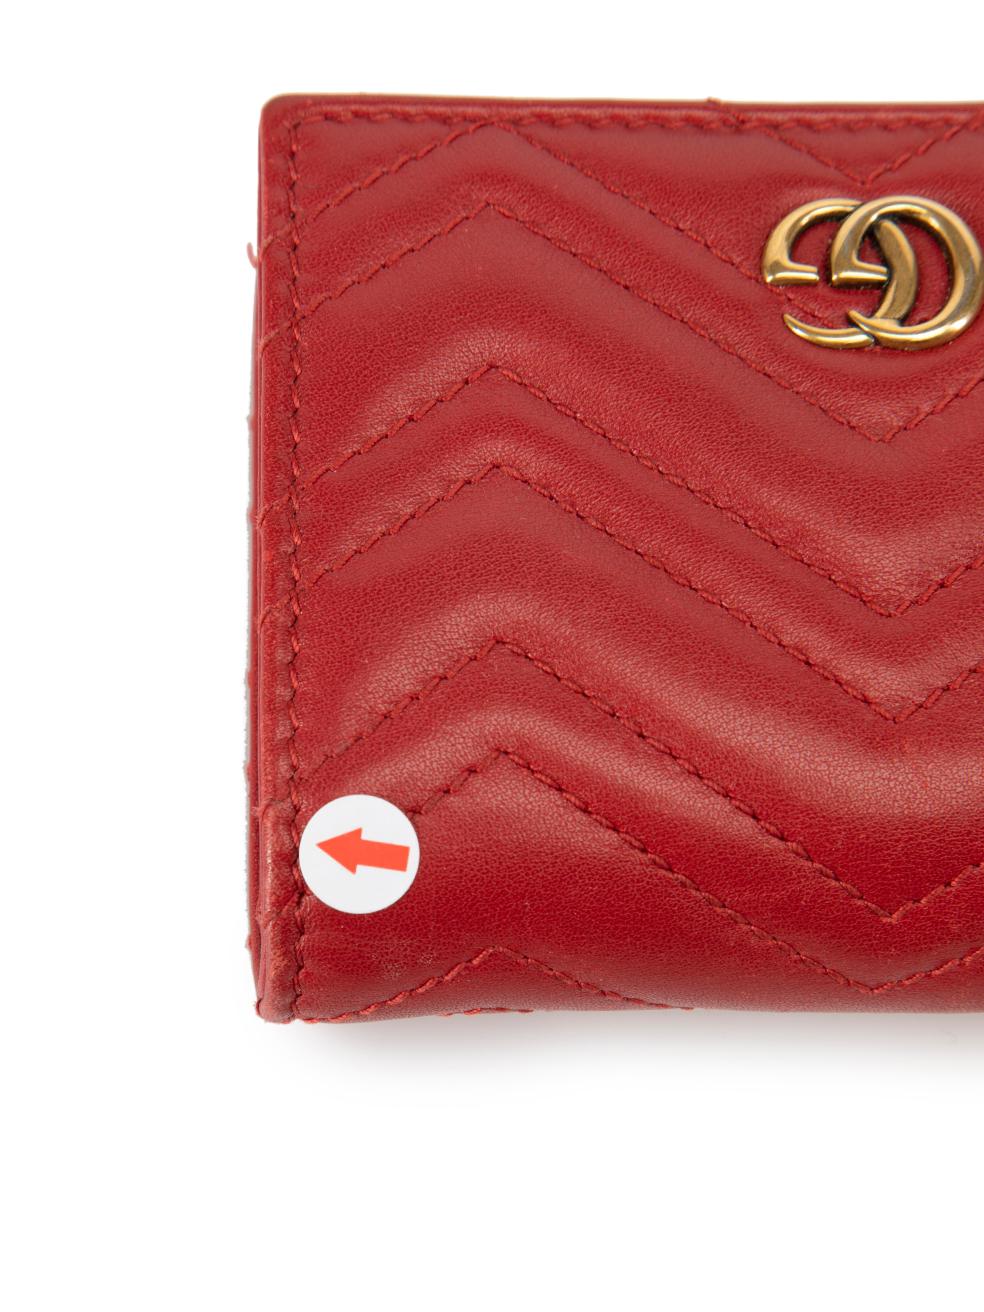 Gucci Women's Red Leather GG Marmont Matelasse Wallet 5